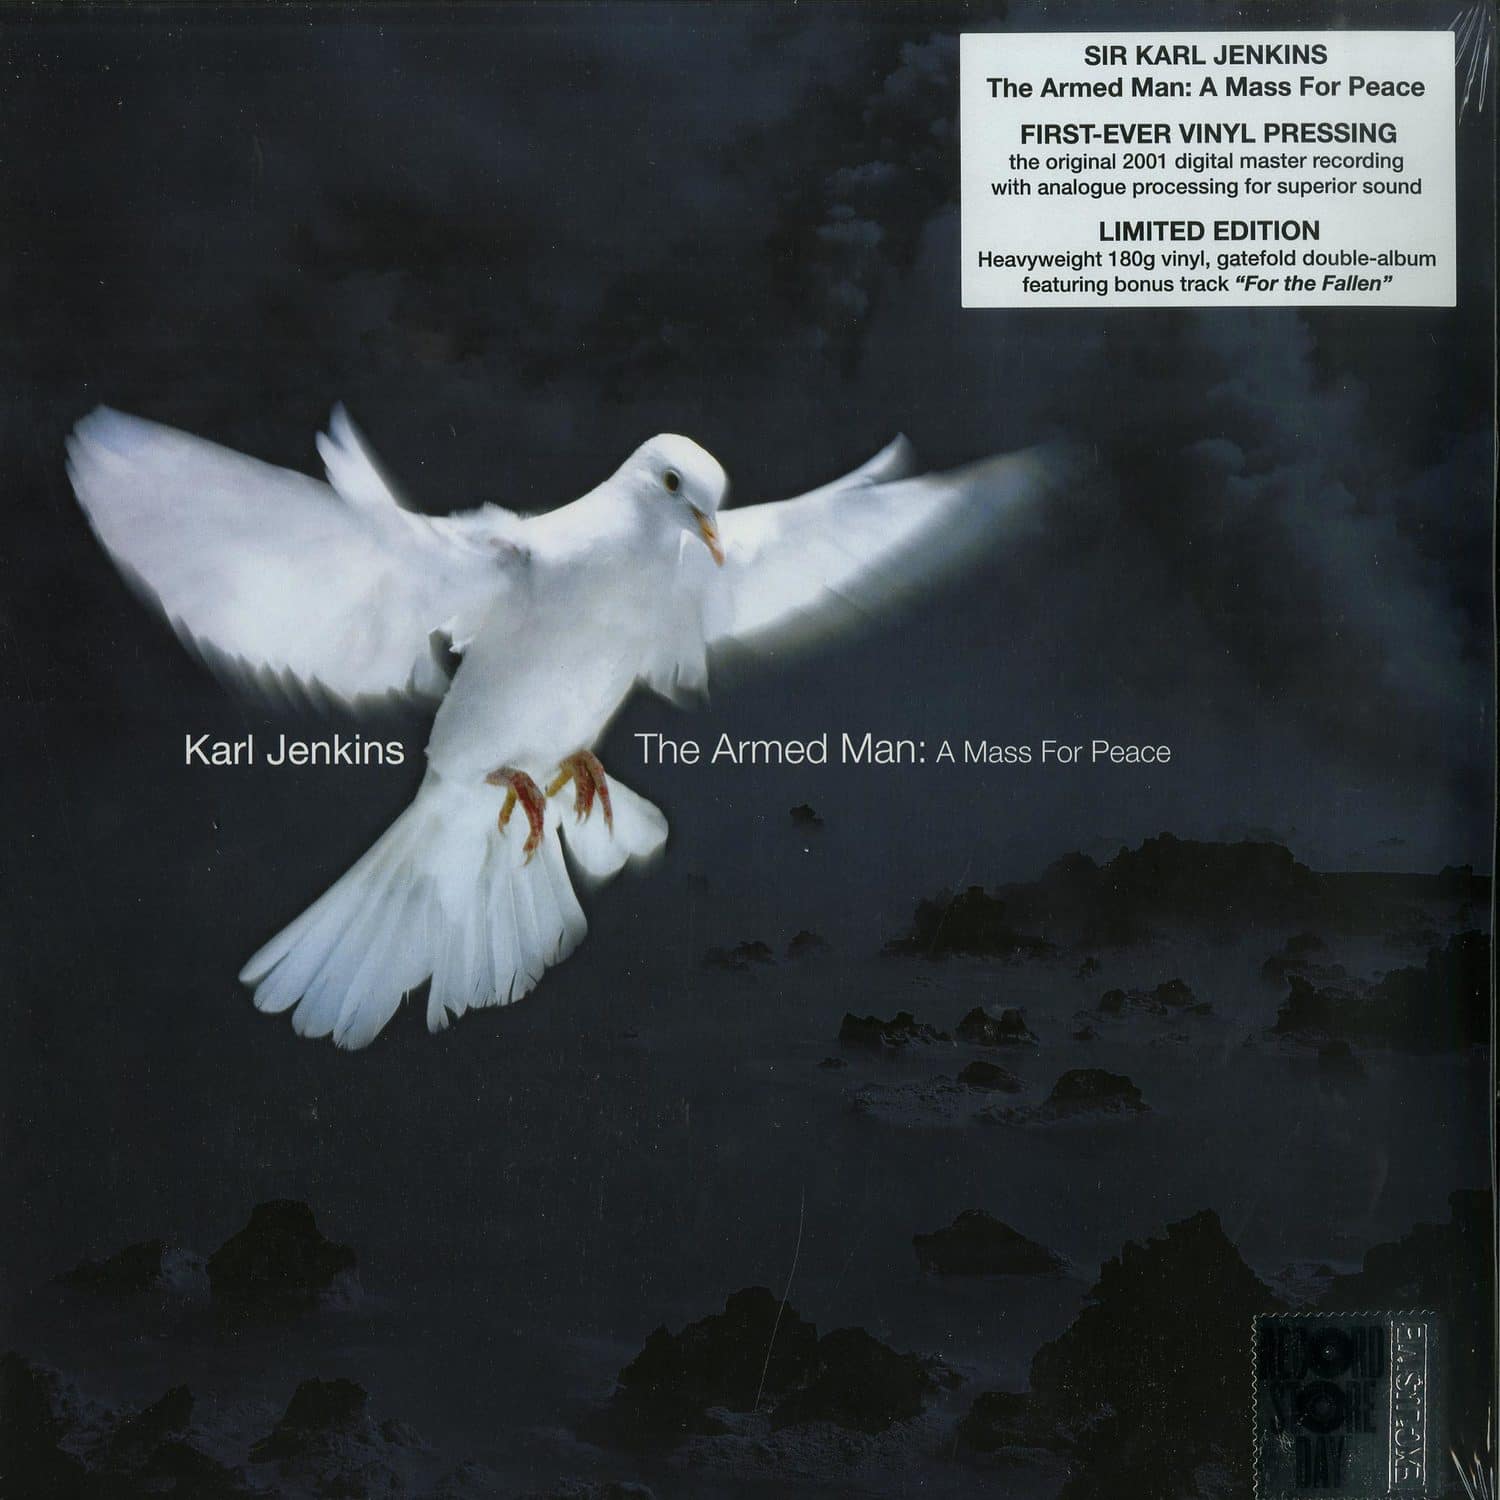 Karl Jenkins - THE ARMED MAN: A MASS FOR PEACE 